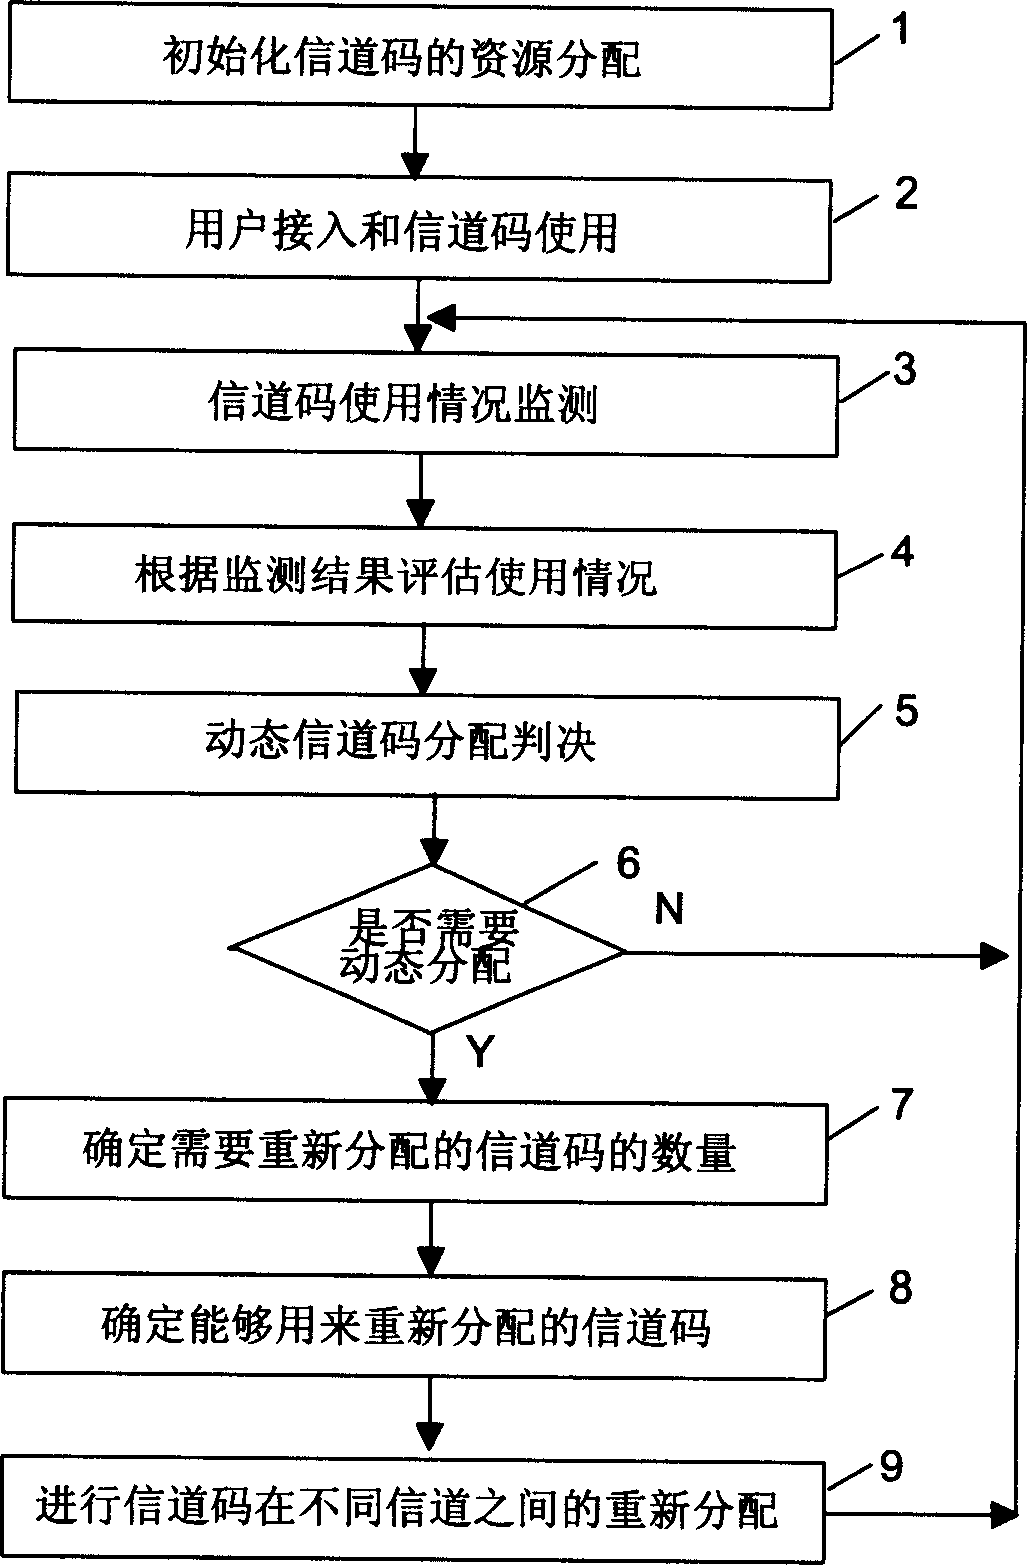 Method for dynamic sharing resource of channel codes between heterogeneous channels